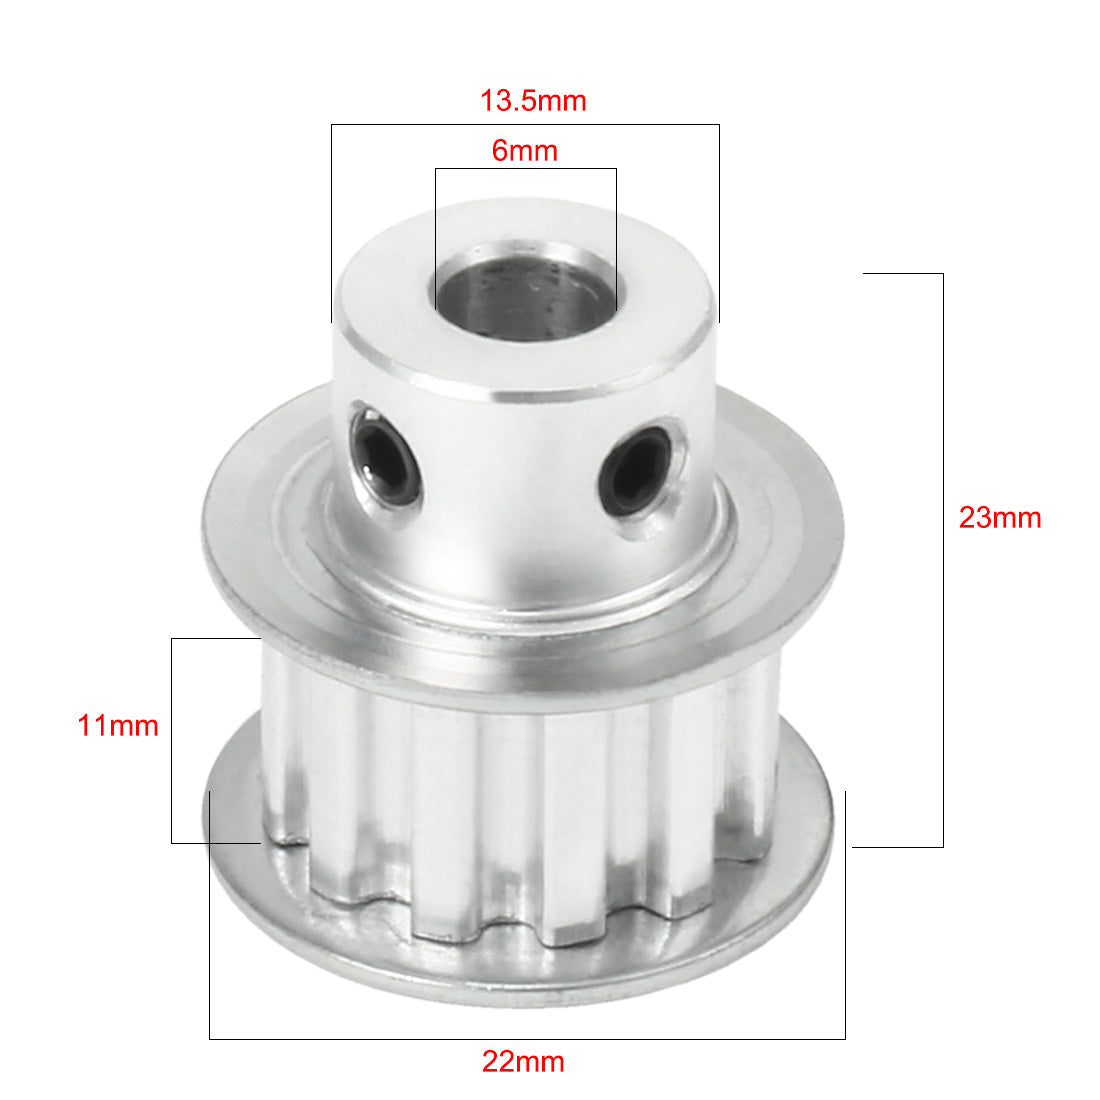 uxcell Uxcell Aluminum XL 12 Teeth 6mm Bore Timing Belt Idler Pulley Flange Synchronous Wheel for 10mm Belt 3D Printer CNC